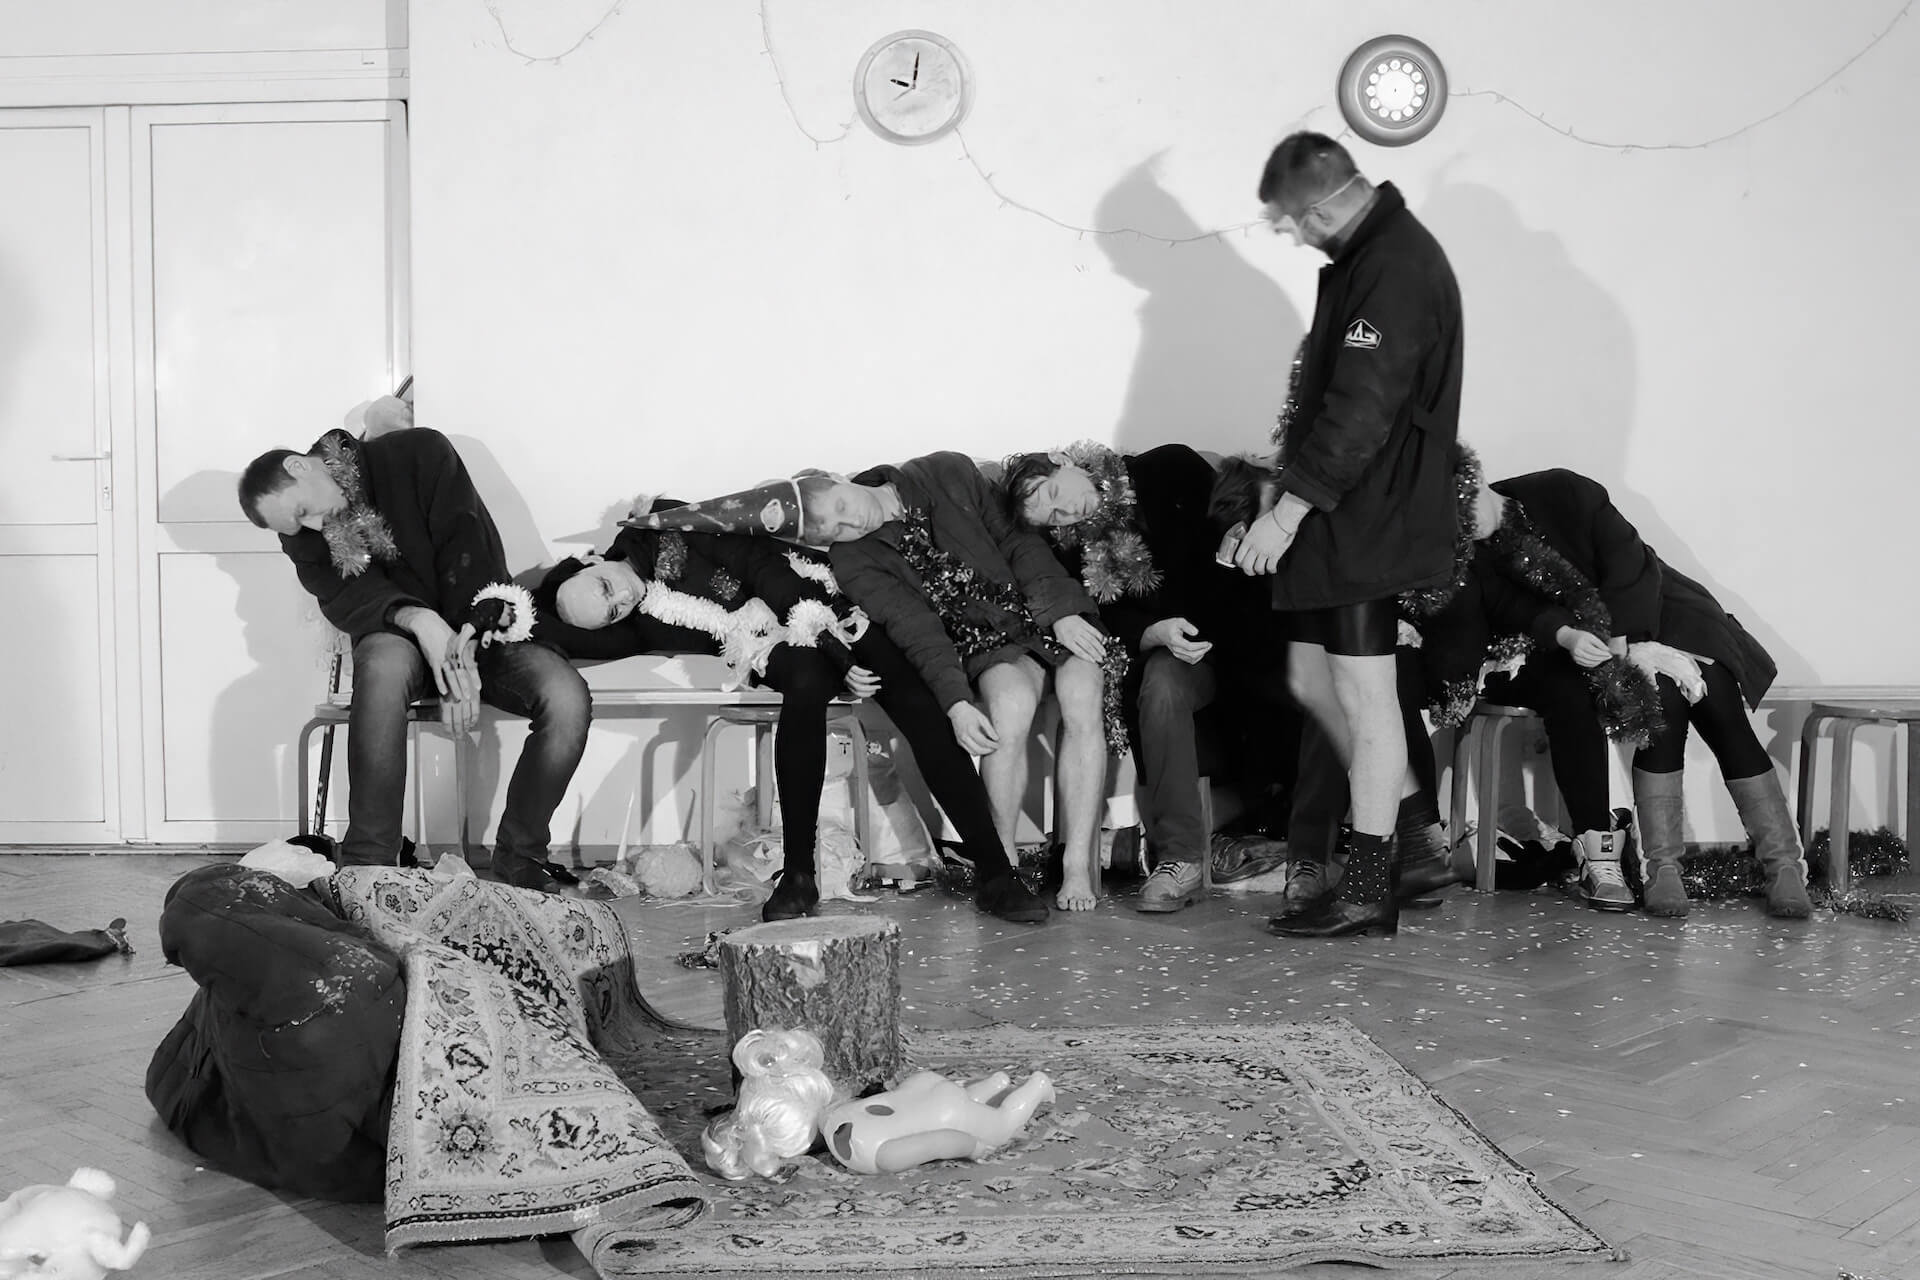 Black and white image of the performers on a chair long the wall sleeping. One other performer is walking around and looking at them.